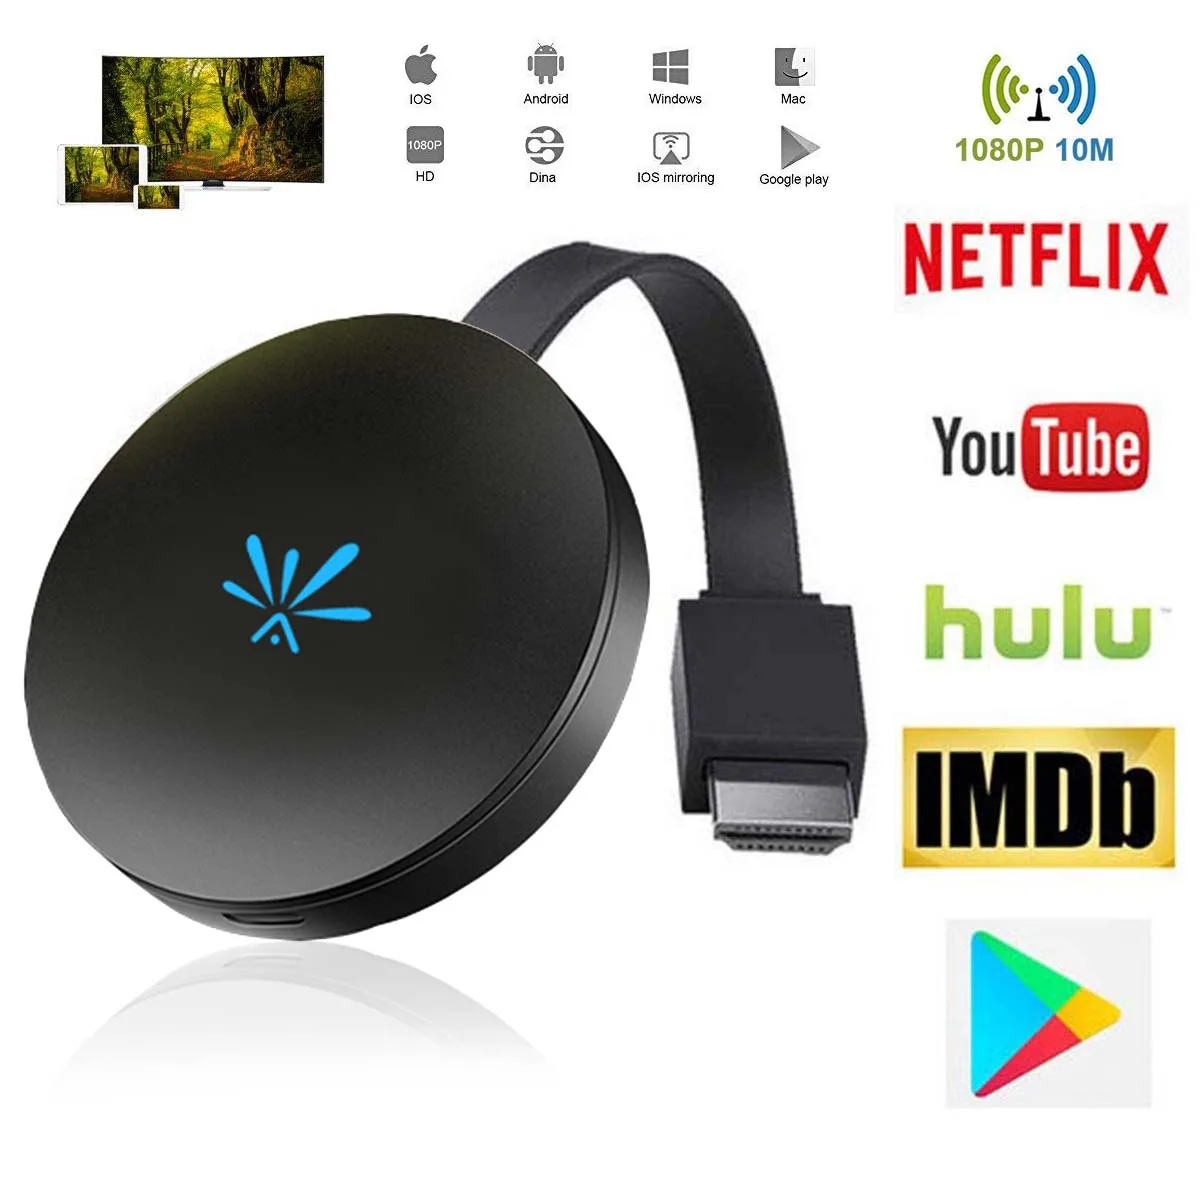 

TV Stick Video WiFi Display Dongle HD Digital Media Video Streamer TV Dongle Receiver 2.4GHz For Chromecast 2 Free Shipping